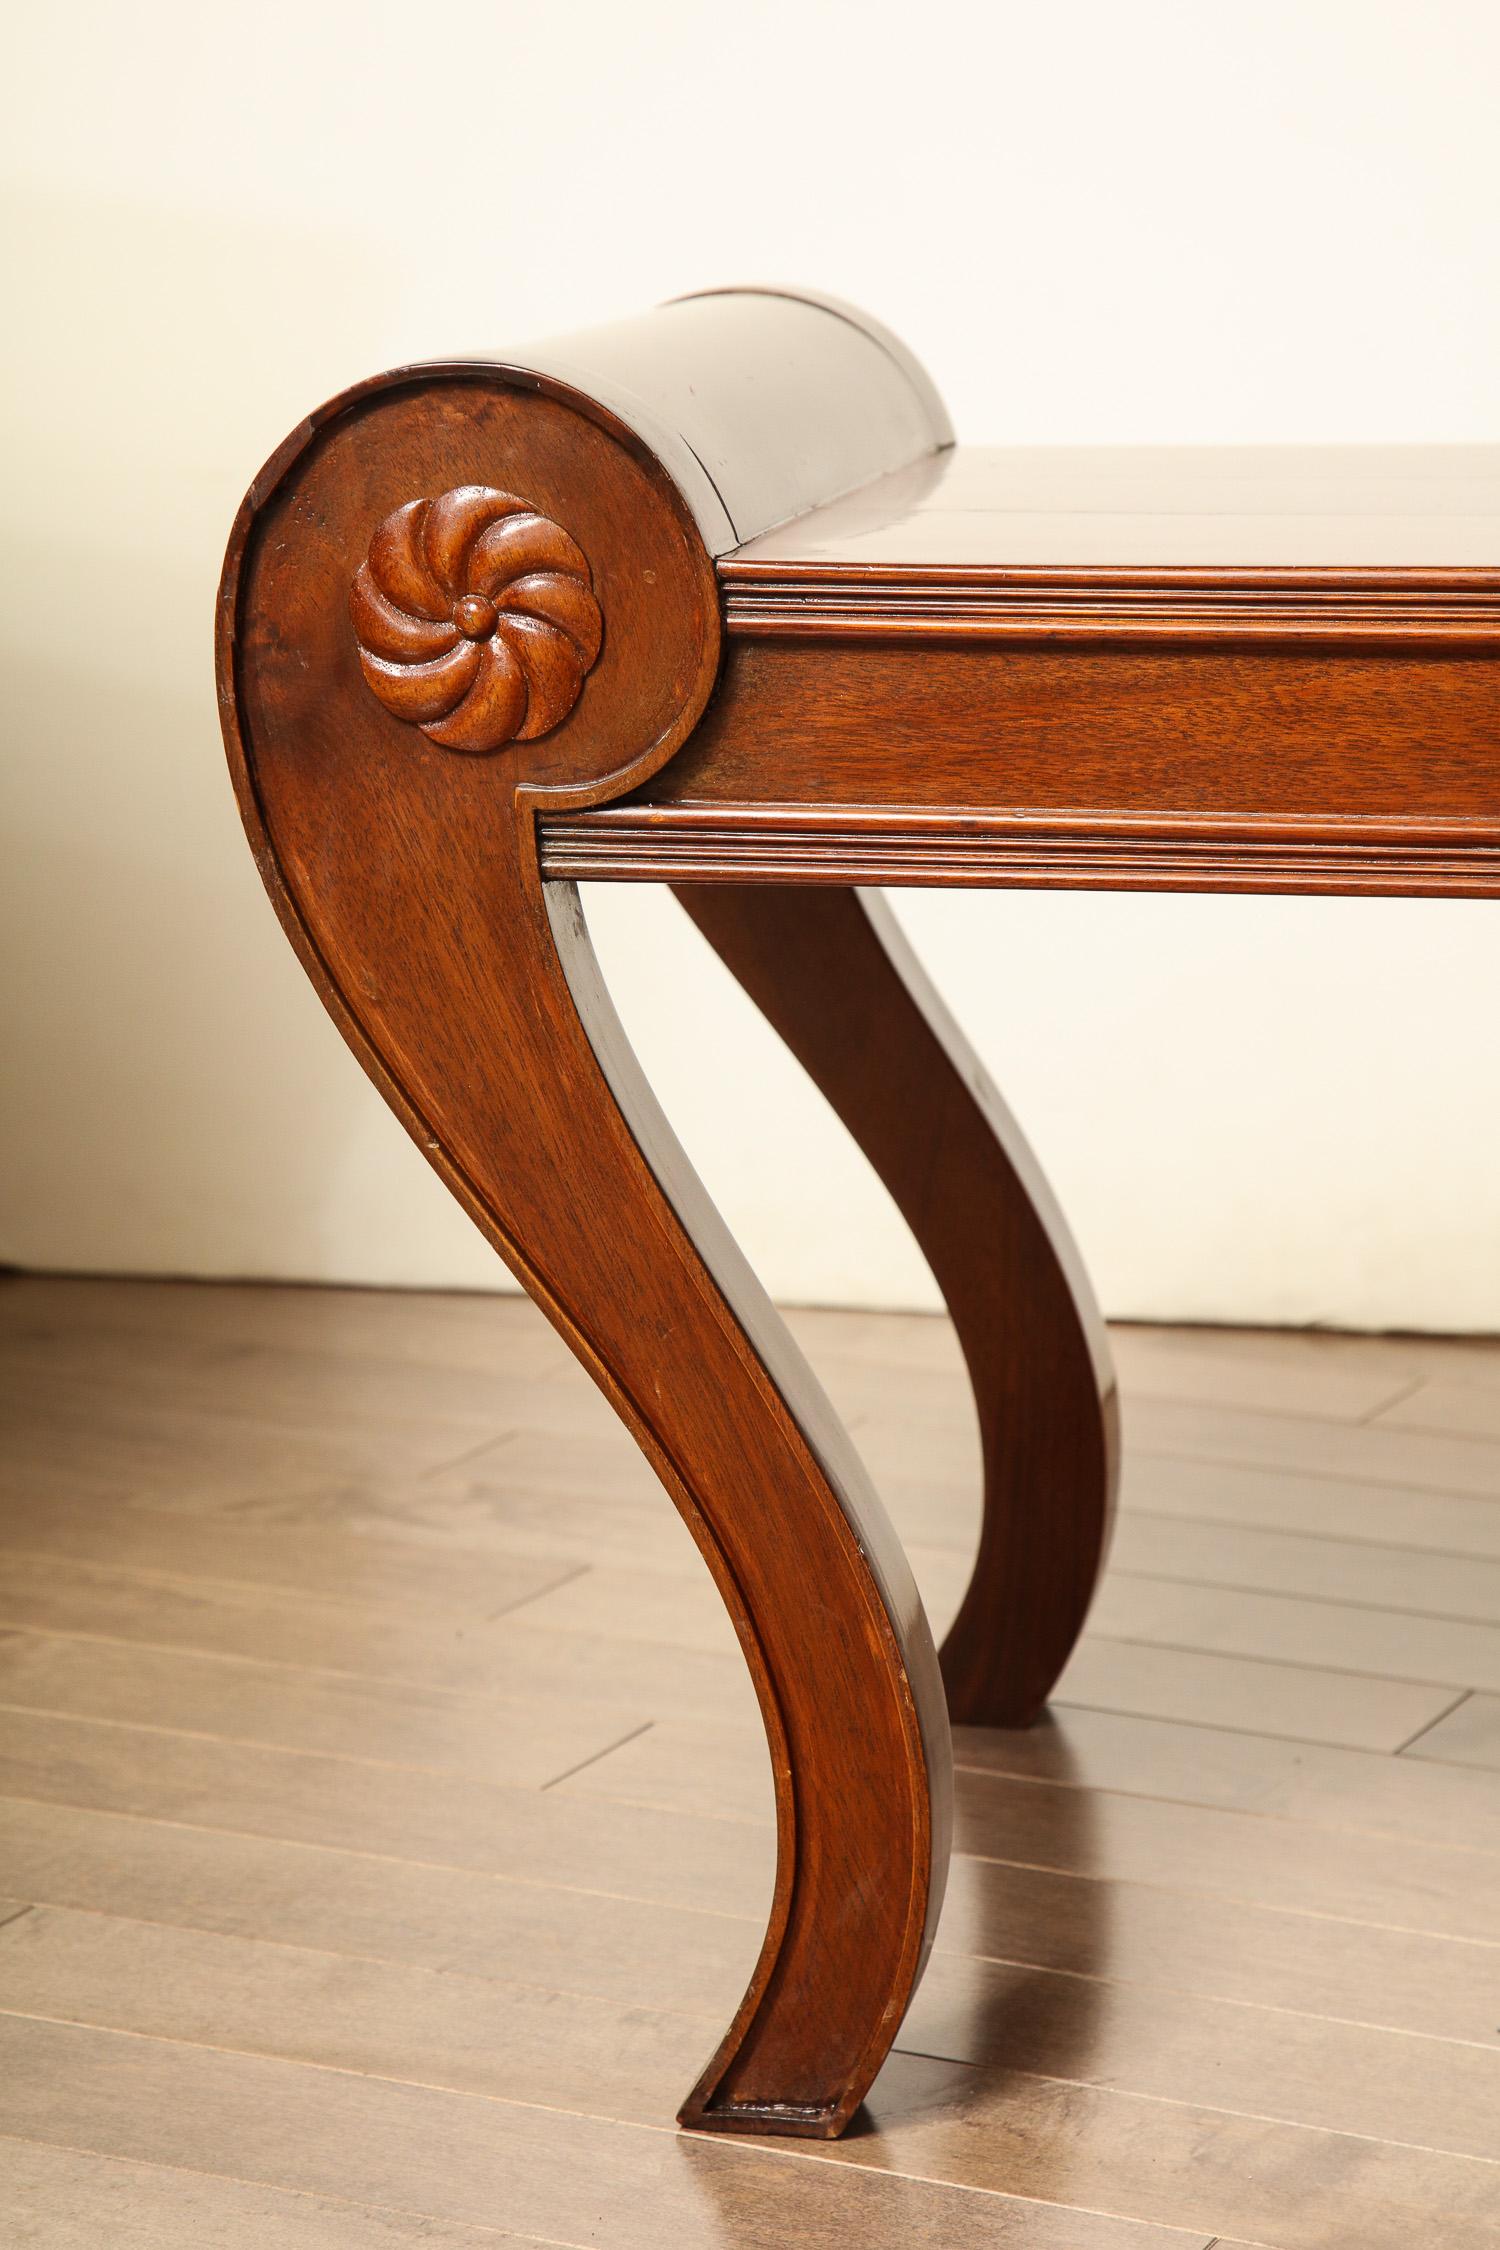 Mahogany Late 19th Century English, Neoclassical Bench in the Regency Style